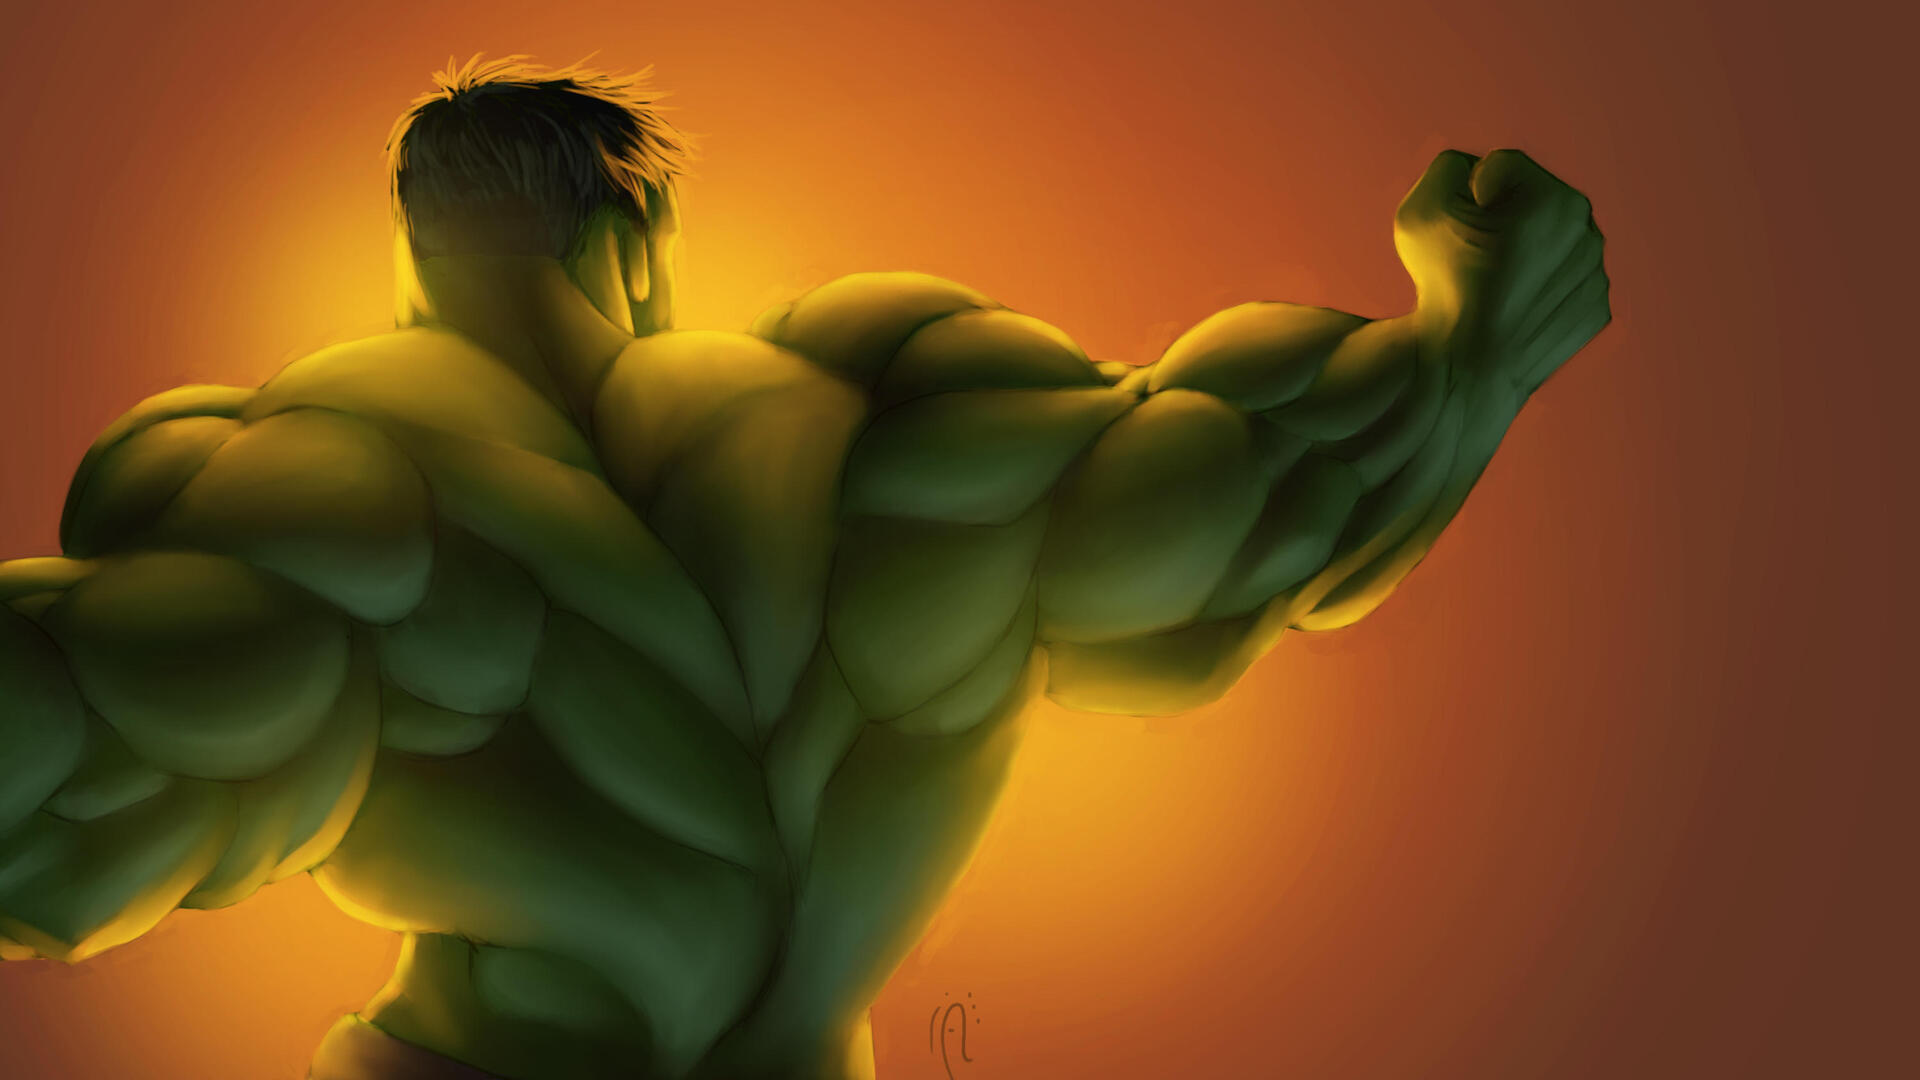 X hulk bodybuilder laptop full hd p hd k wallpapers images backgrounds photos and pictures